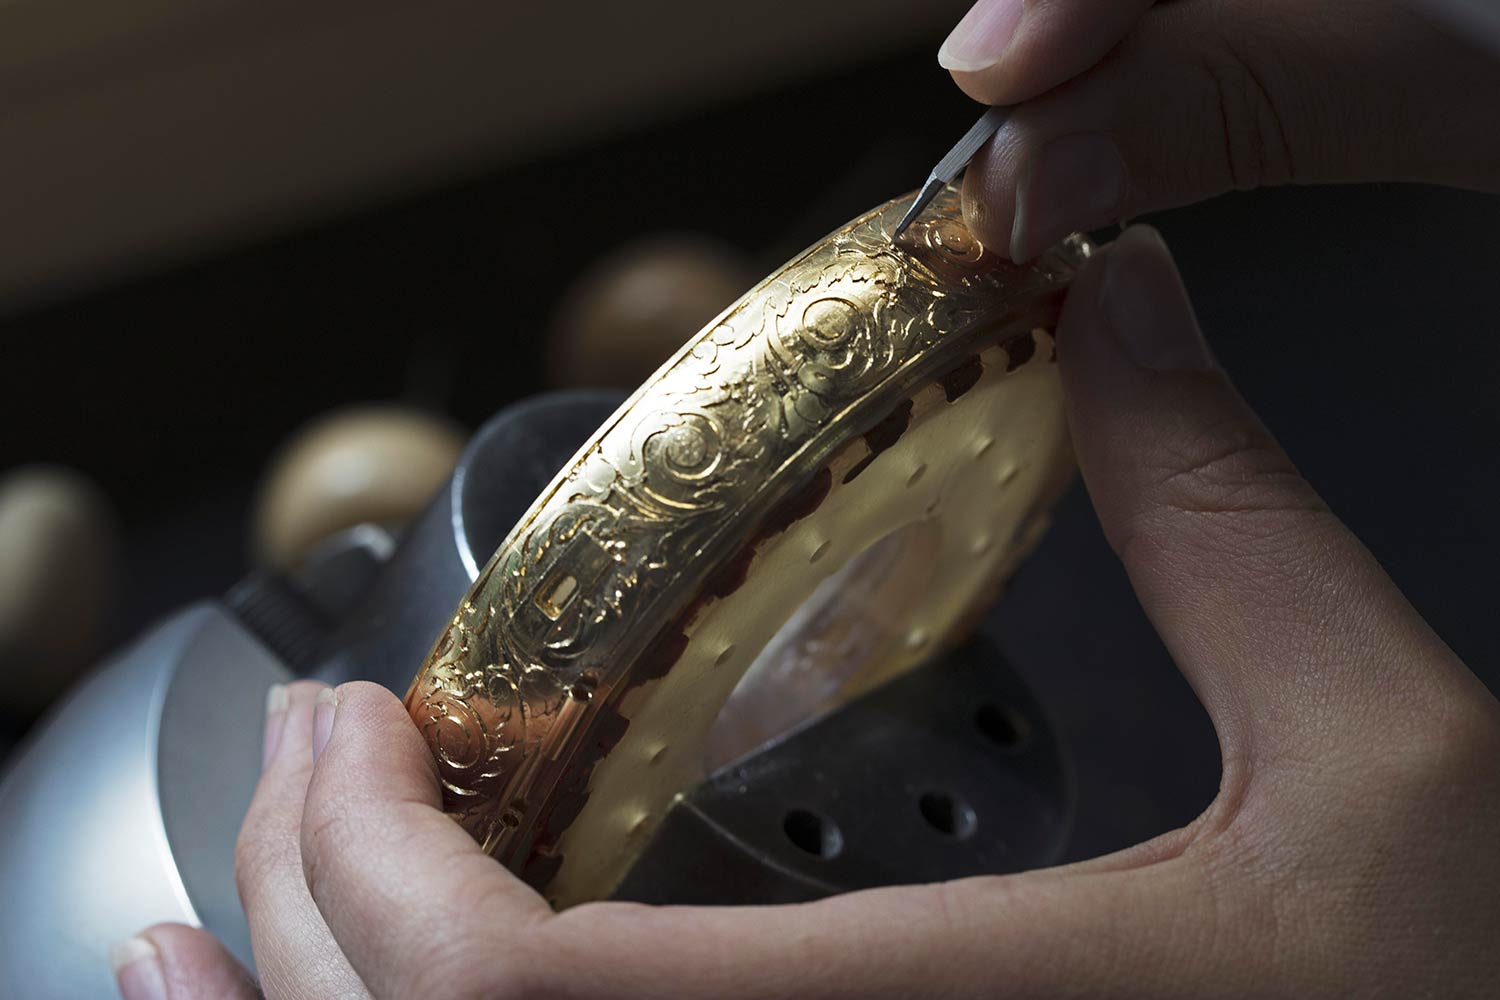 It took over five months for the master engraver to enhance every little detail on the case using various traditional techniques.